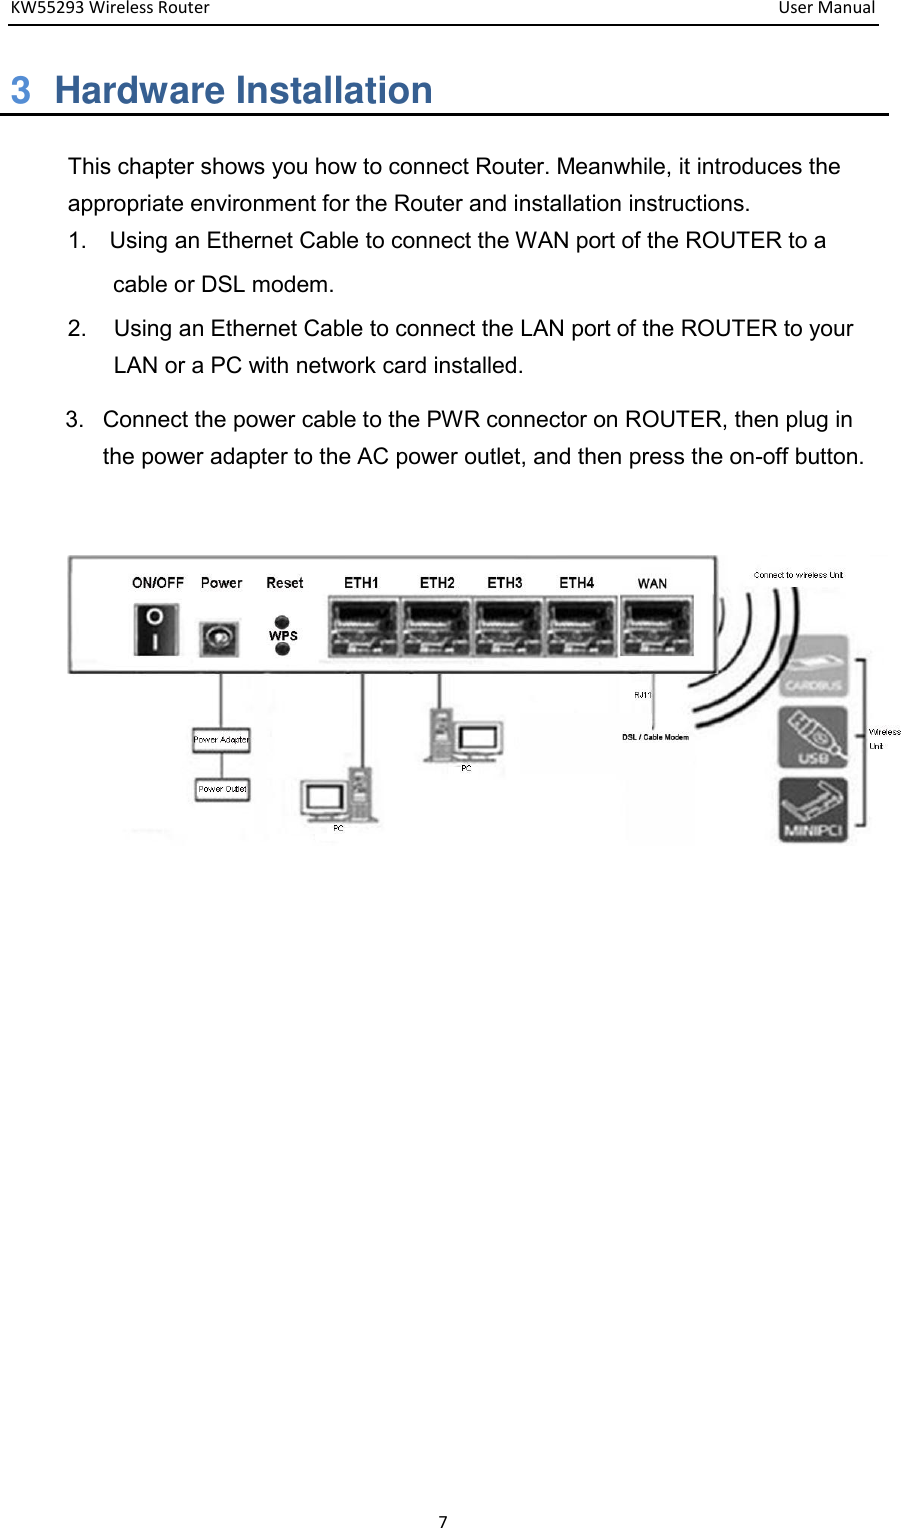 KW55293 Wireless Router         User Manual 7 3  Hardware Installation This chapter shows you how to connect Router. Meanwhile, it introduces the appropriate environment for the Router and installation instructions.   1.    Using an Ethernet Cable to connect the WAN port of the ROUTER to a   cable or DSL modem.   2.  Using an Ethernet Cable to connect the LAN port of the ROUTER to your LAN or a PC with network card installed. 3.  Connect the power cable to the PWR connector on ROUTER, then plug in the power adapter to the AC power outlet, and then press the on-off button.            